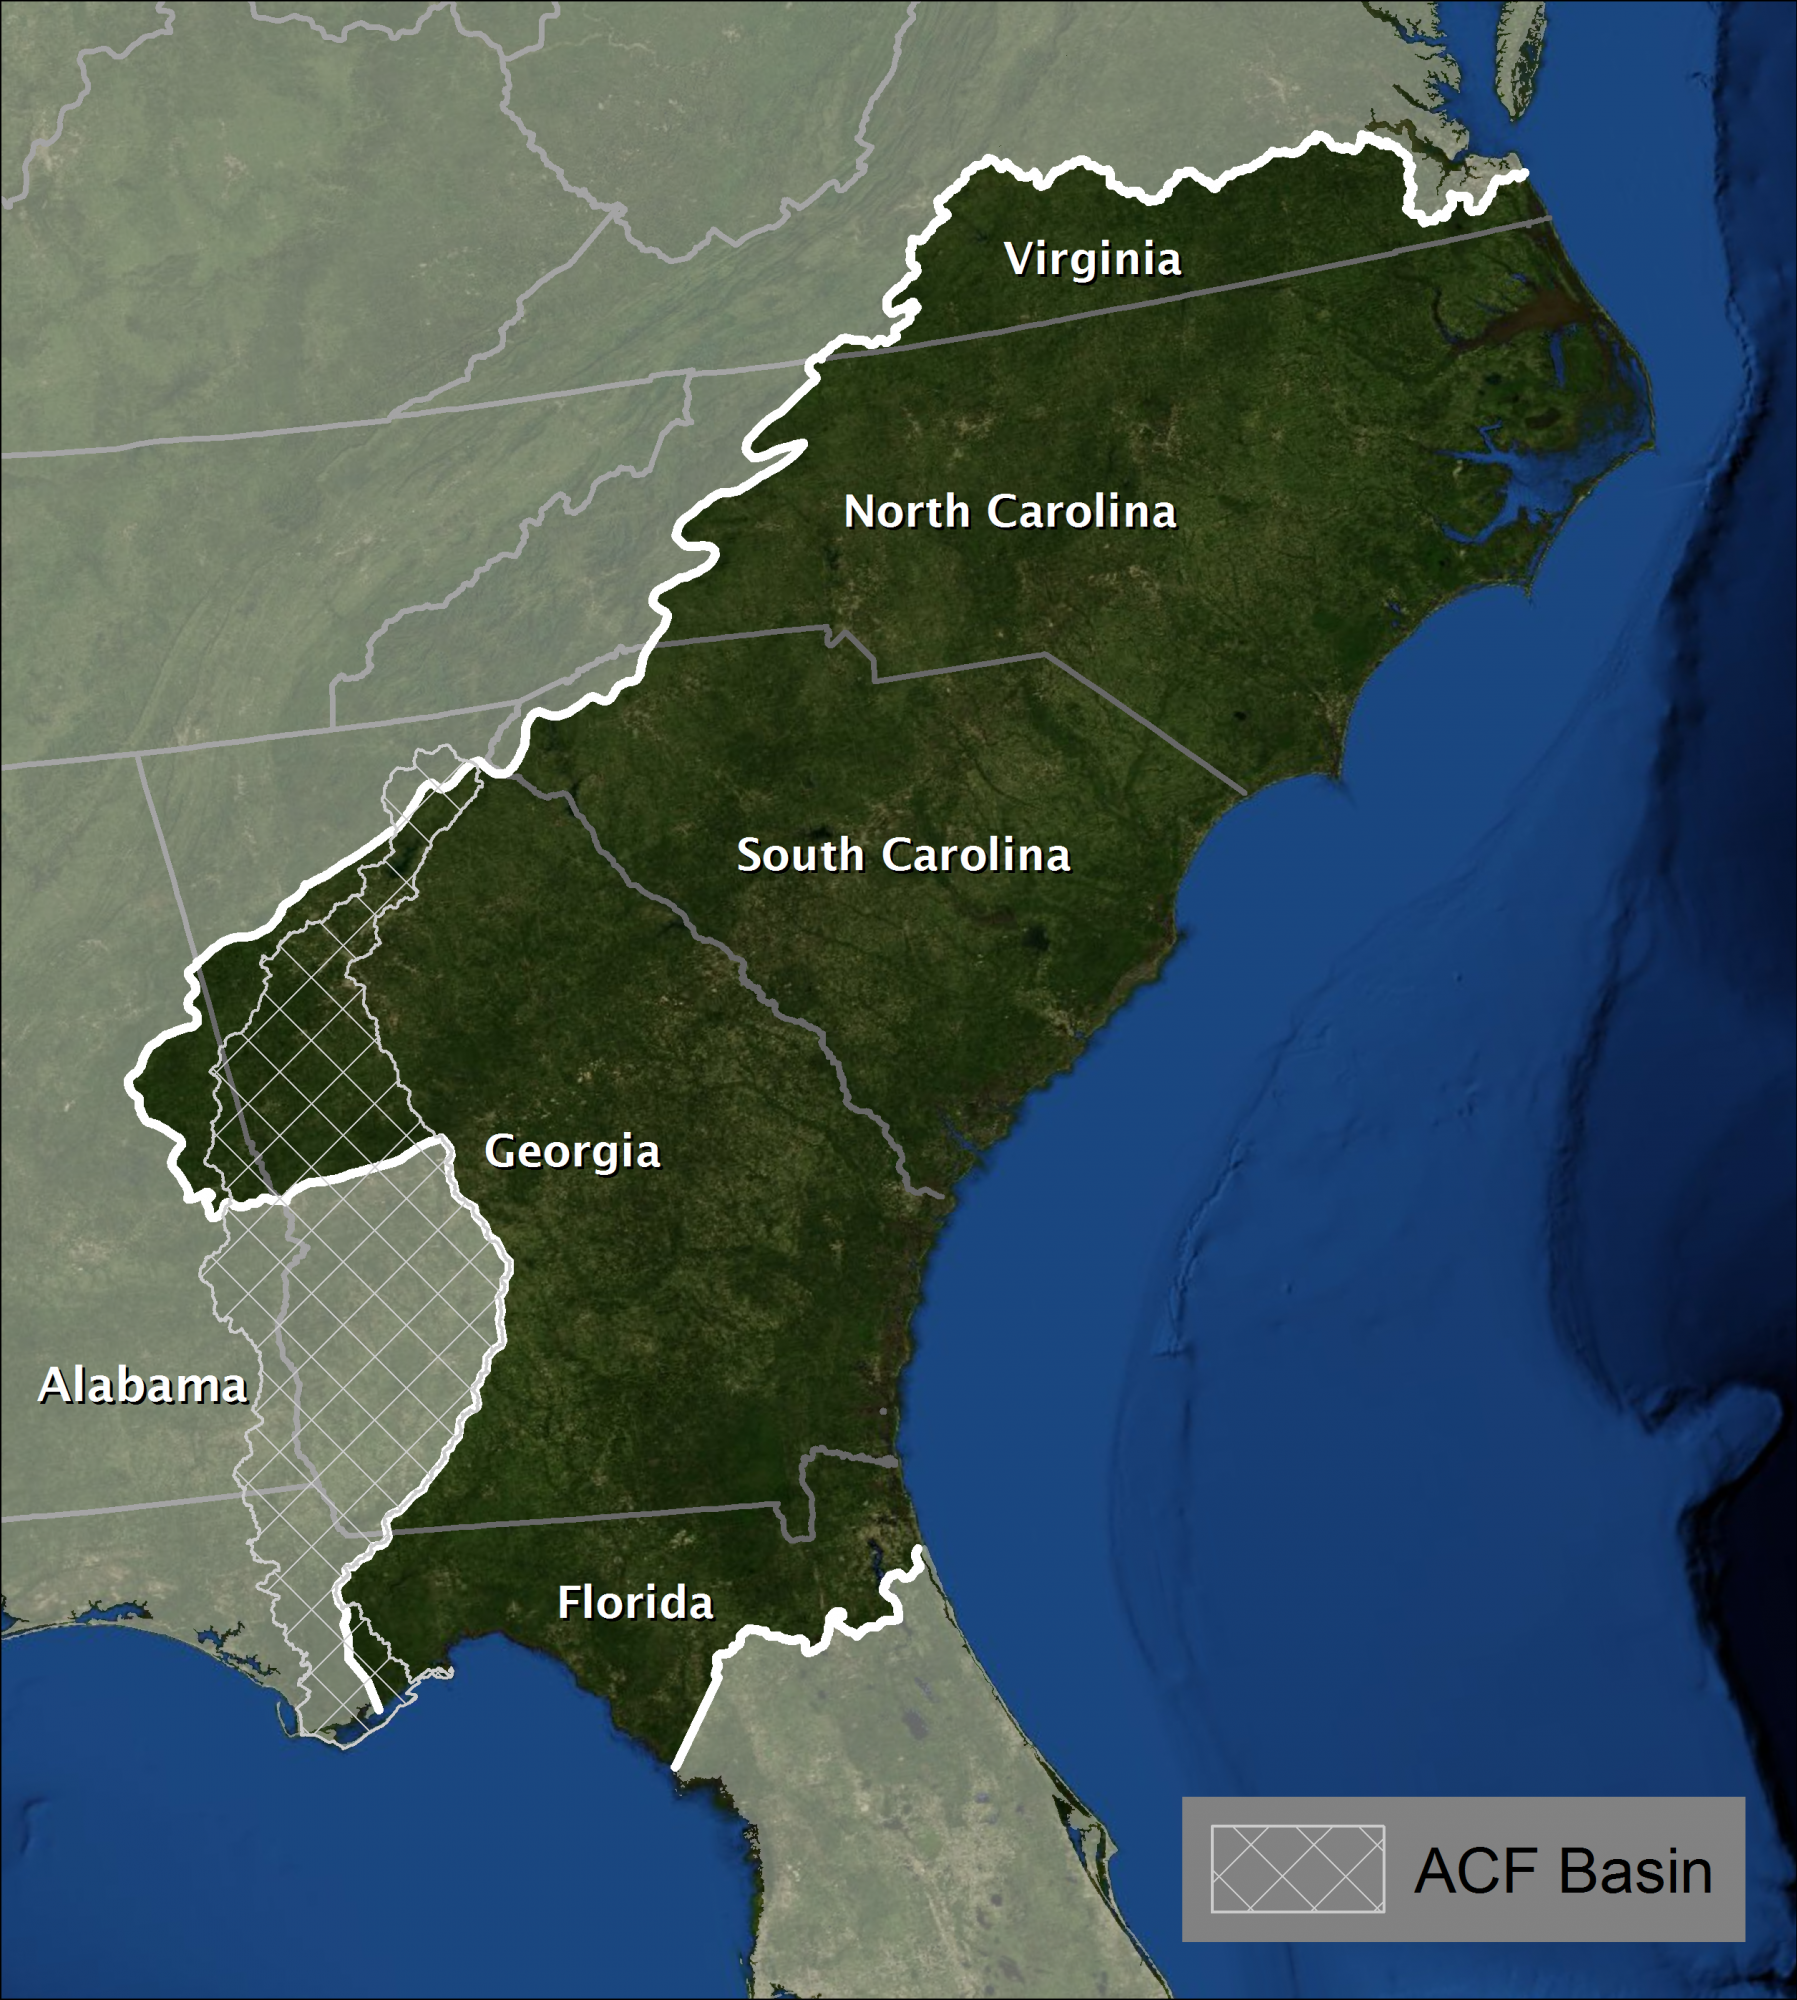 The South Atlantic LCC covers a wide expanse of piedmont and coastal plains from southern Virginia to northern Florida.